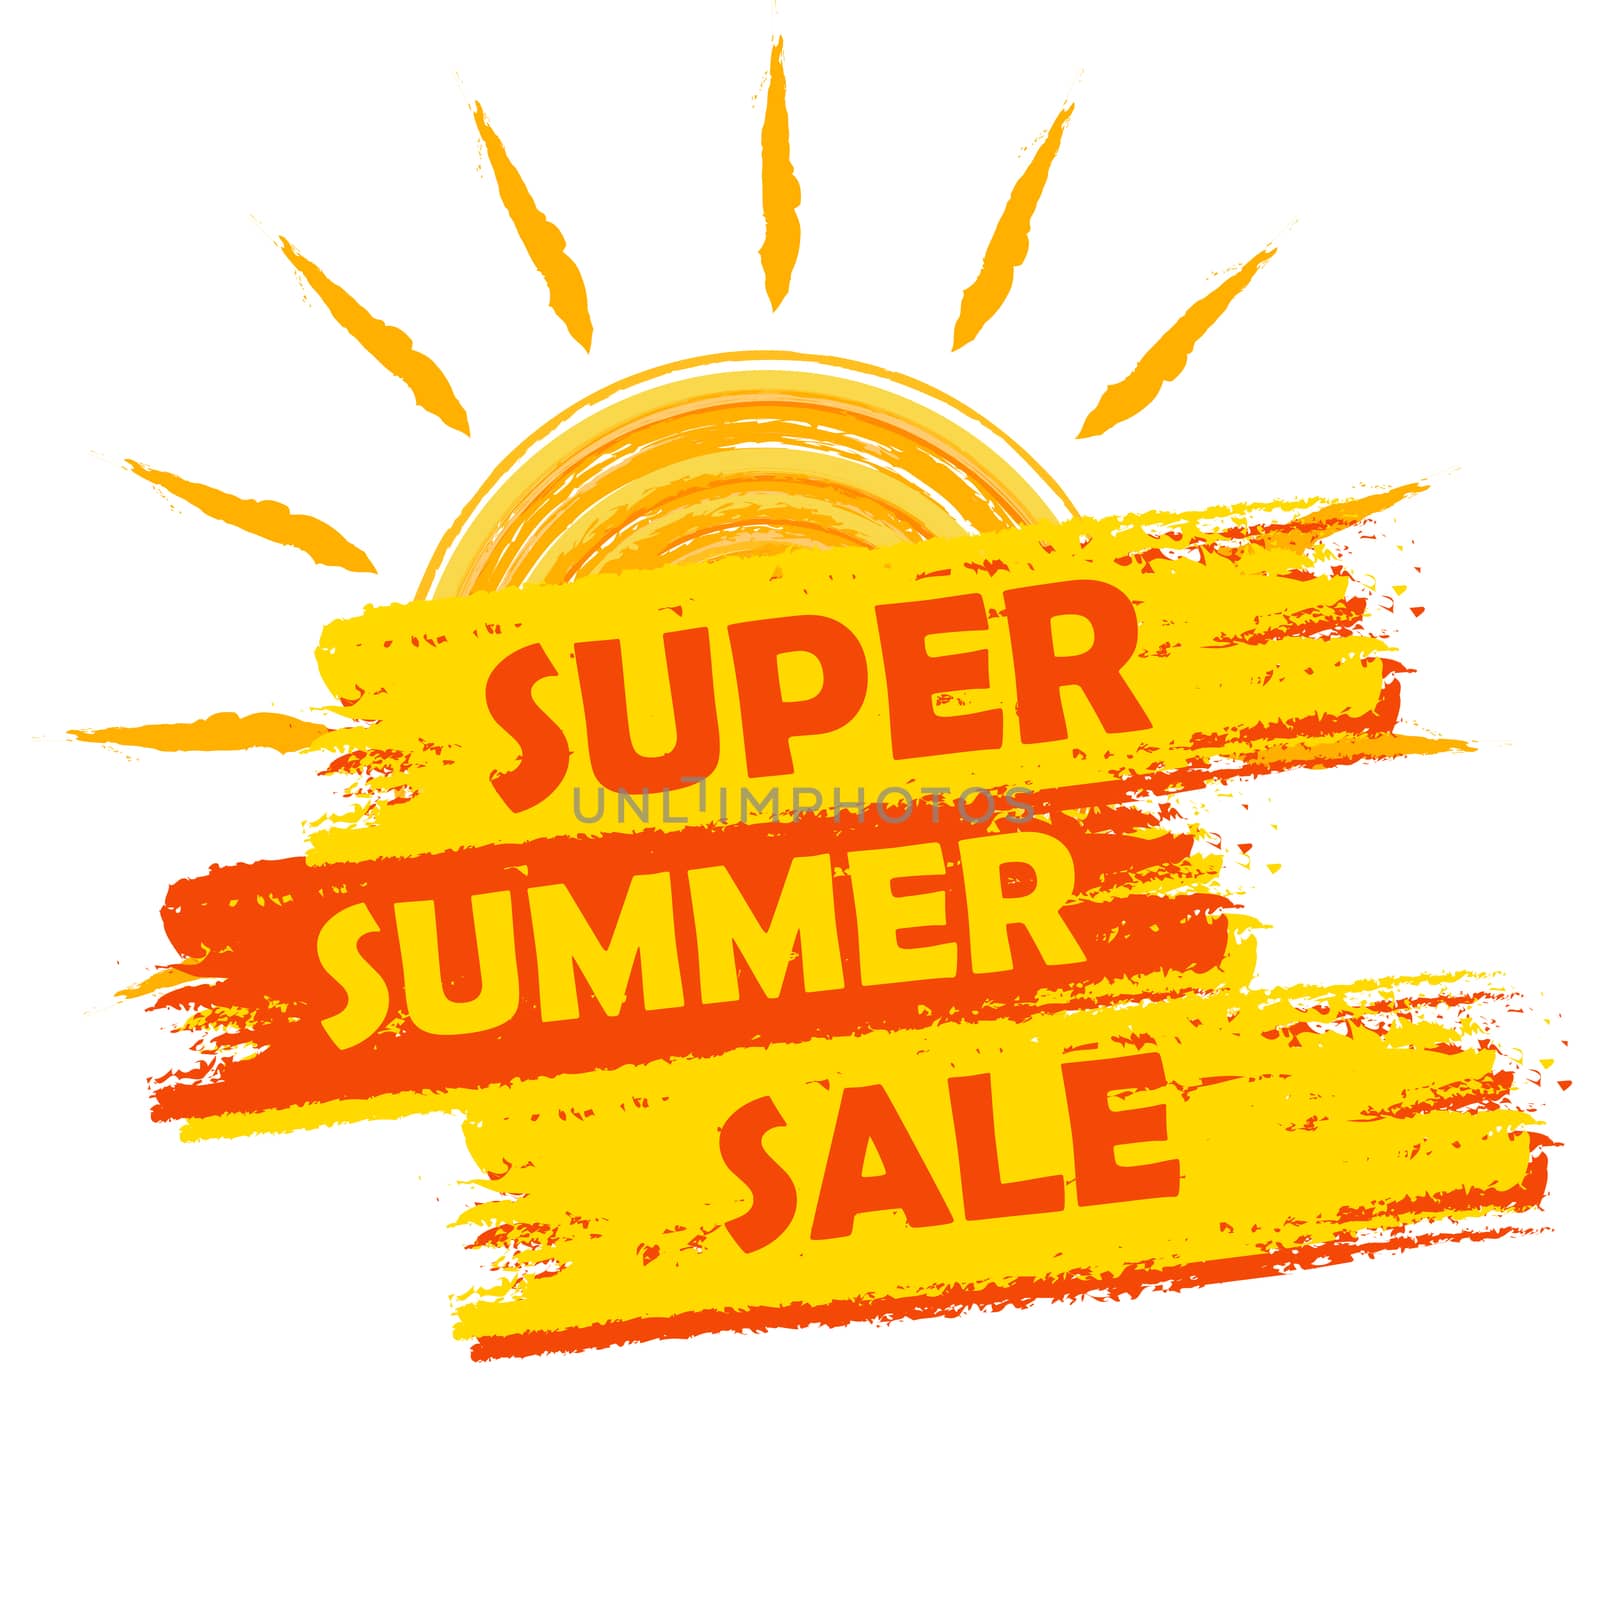 super summer sale banner - text in yellow and orange drawn label with sun symbol, business seasonal shopping concept